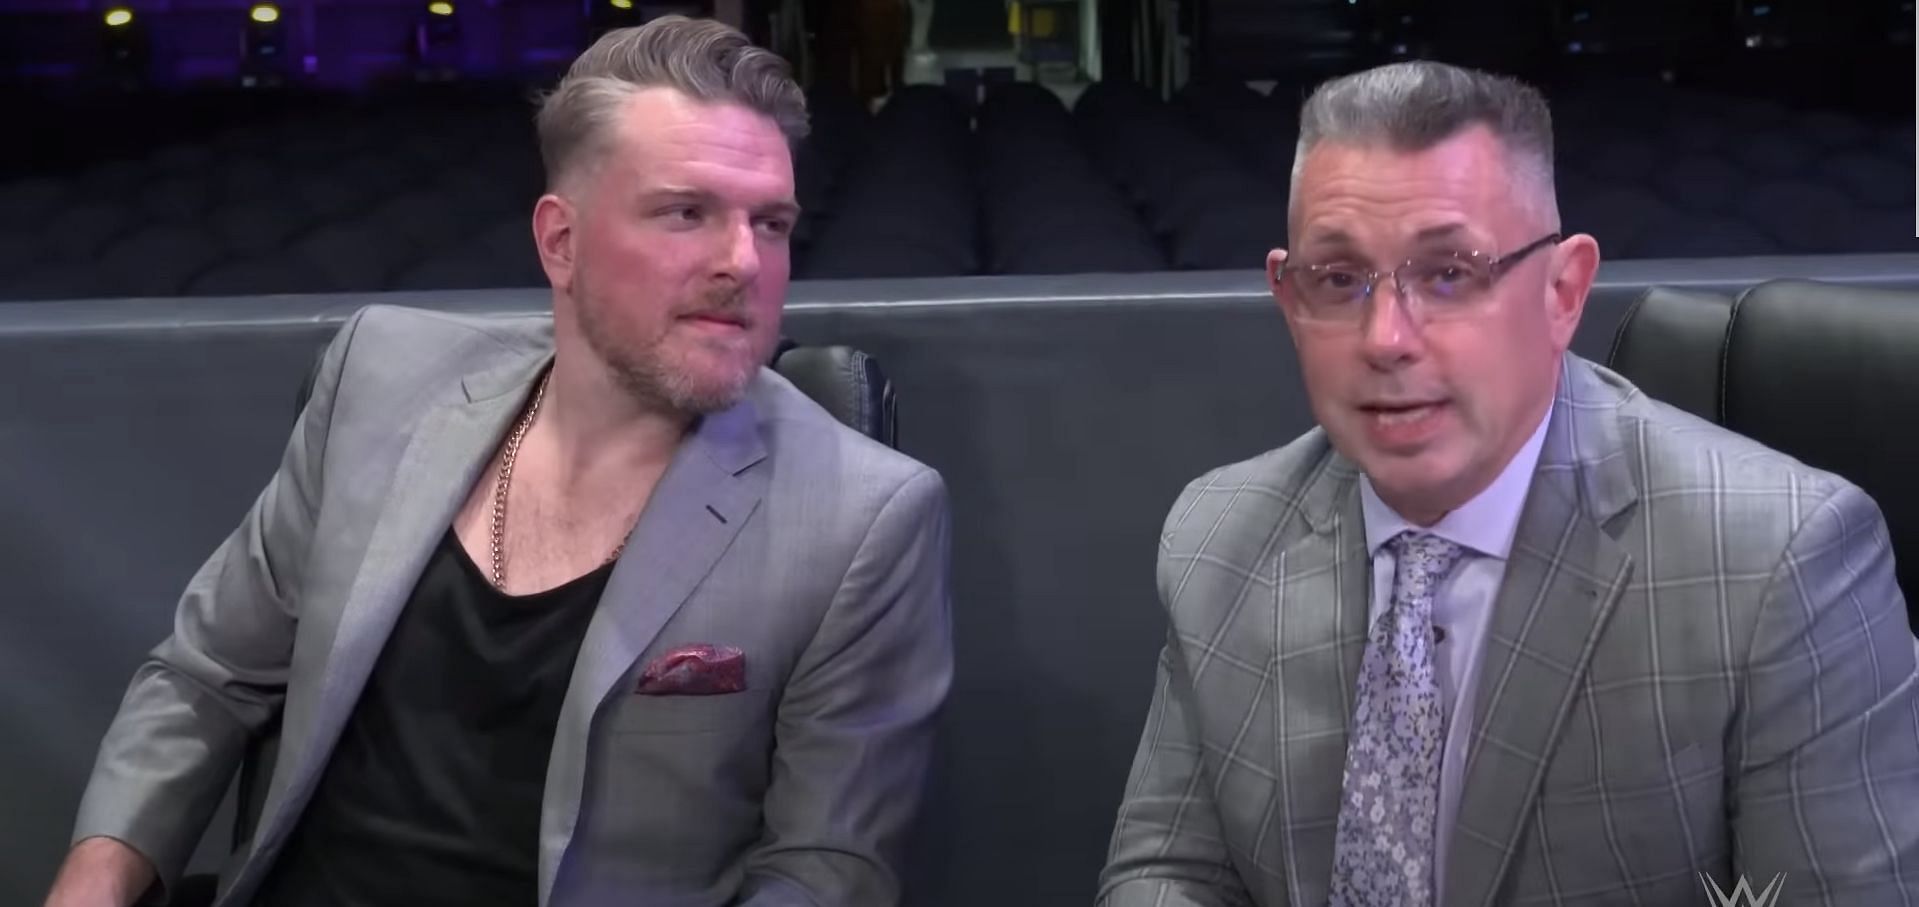 Cole and McAfee; Picture credits: WWE on YouTube